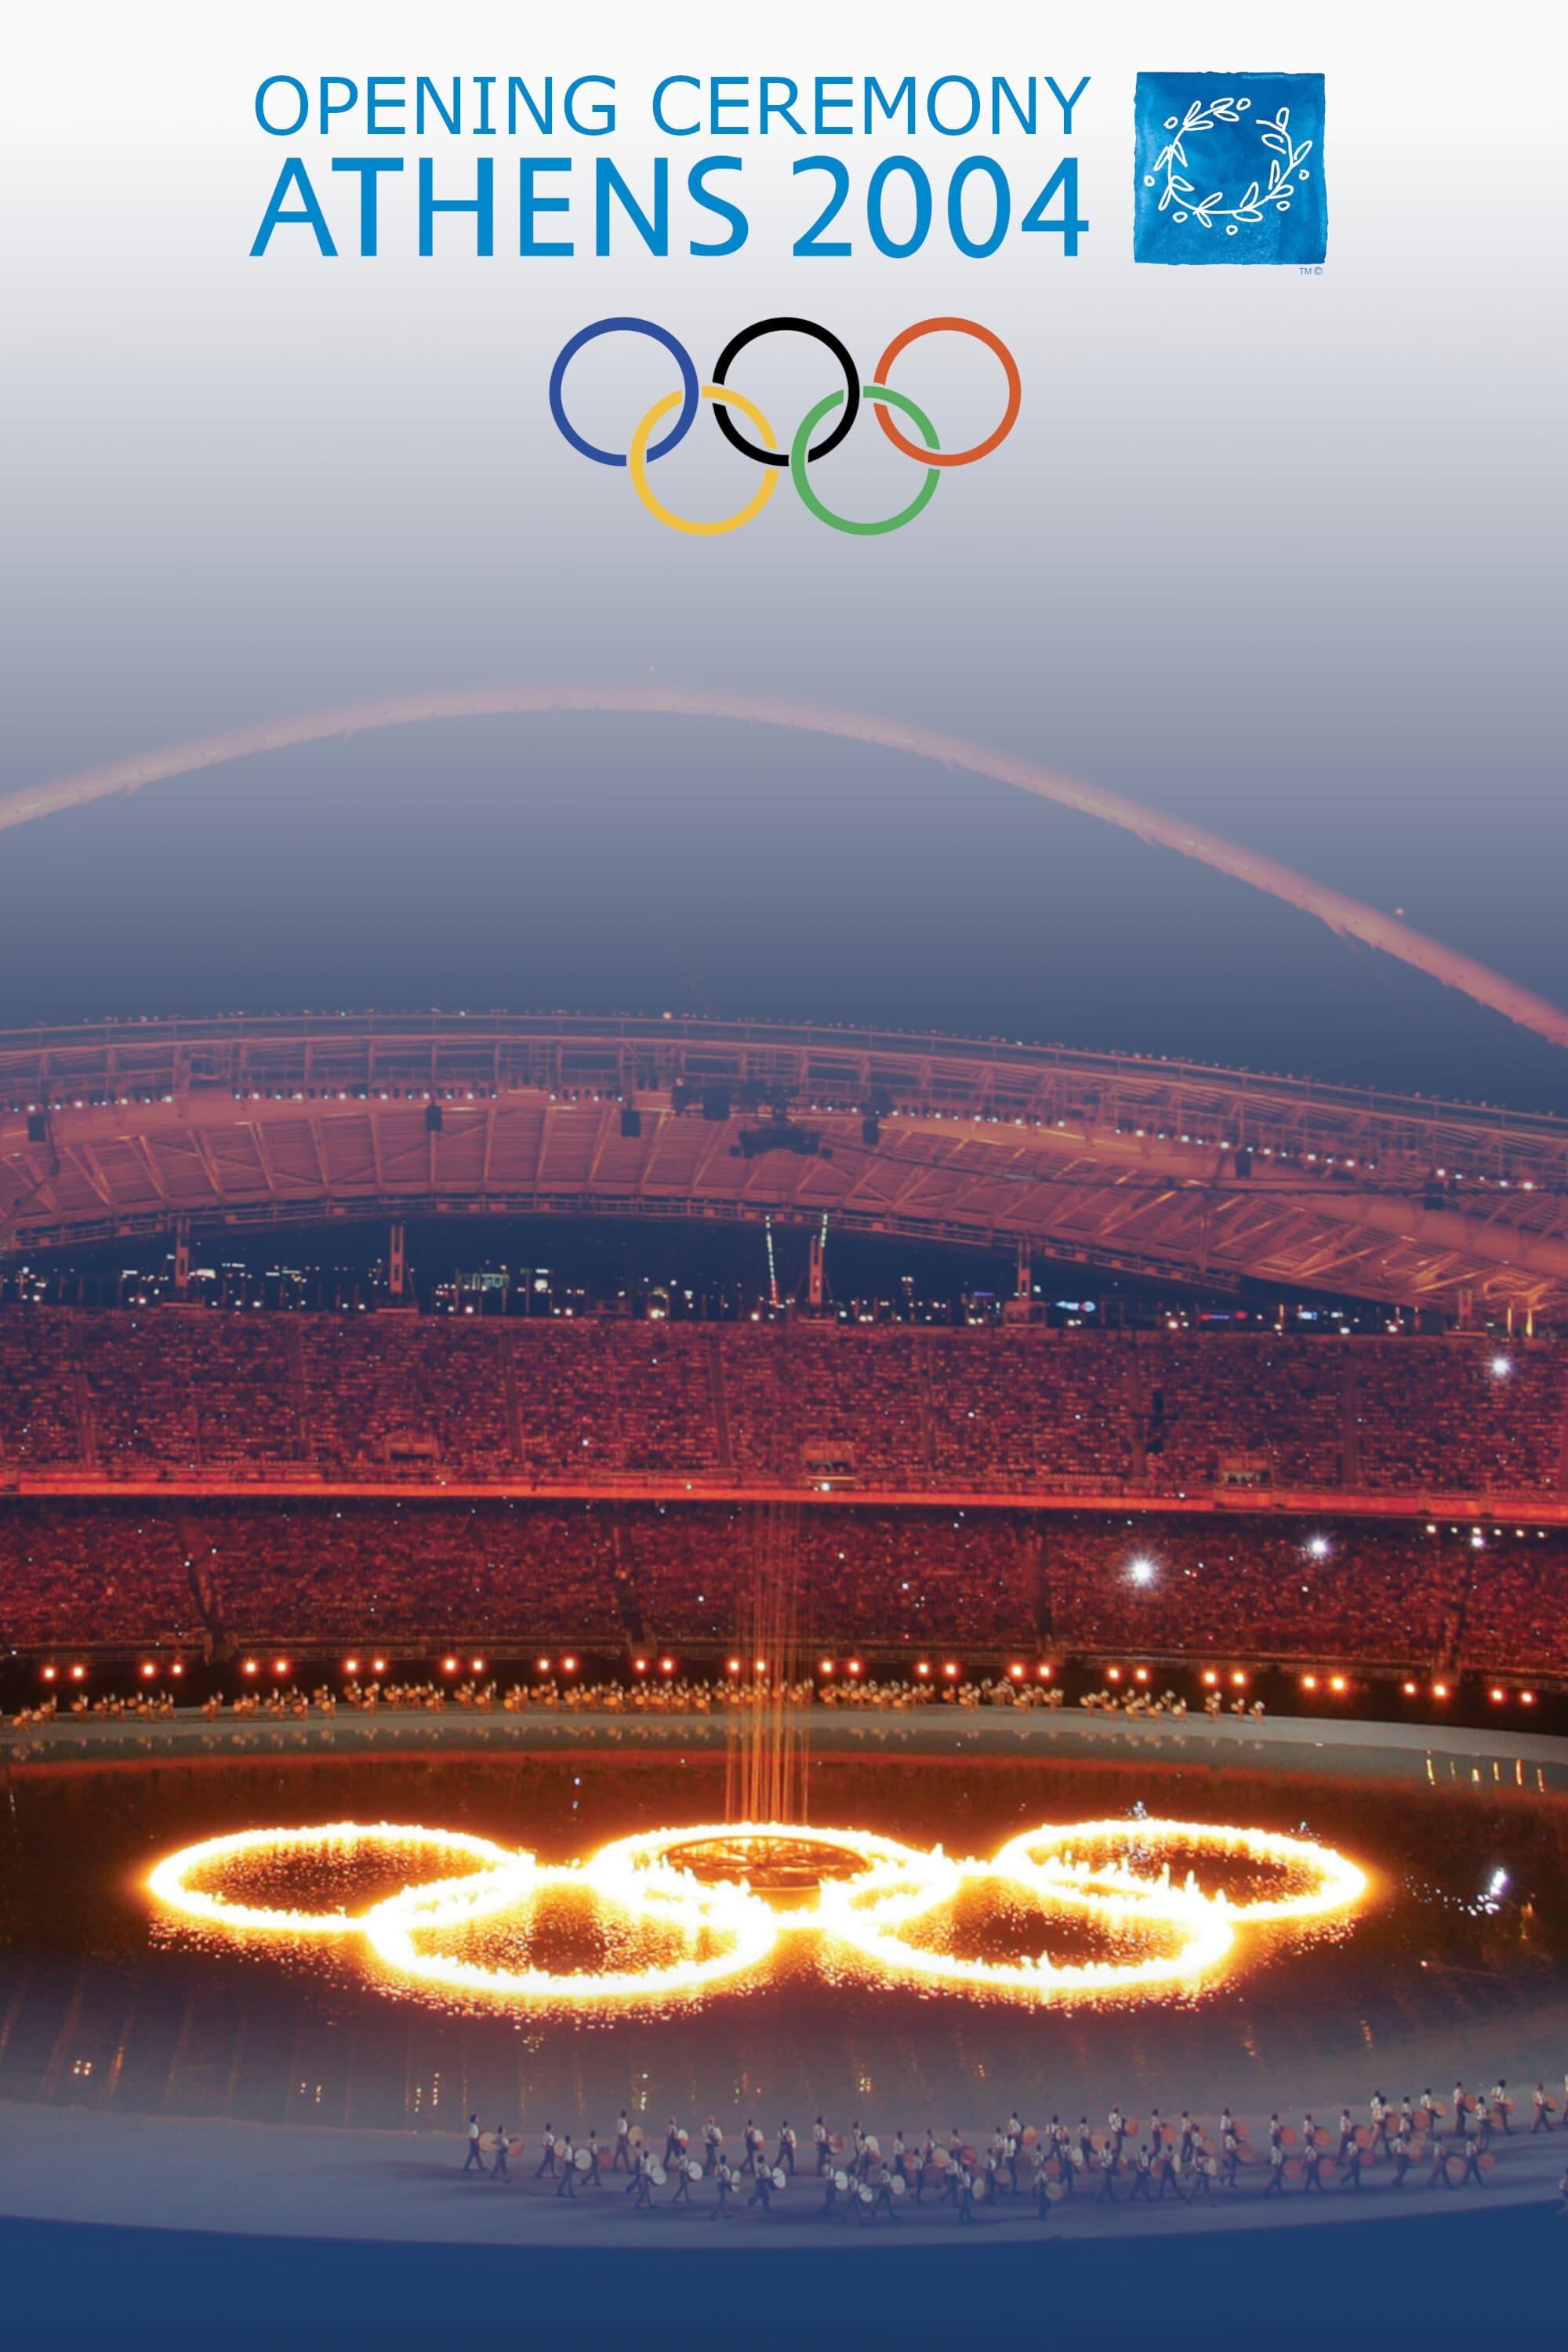 Athens 2004: Olympic Opening Ceremony (Games of the XXVIII Olympiad) poster